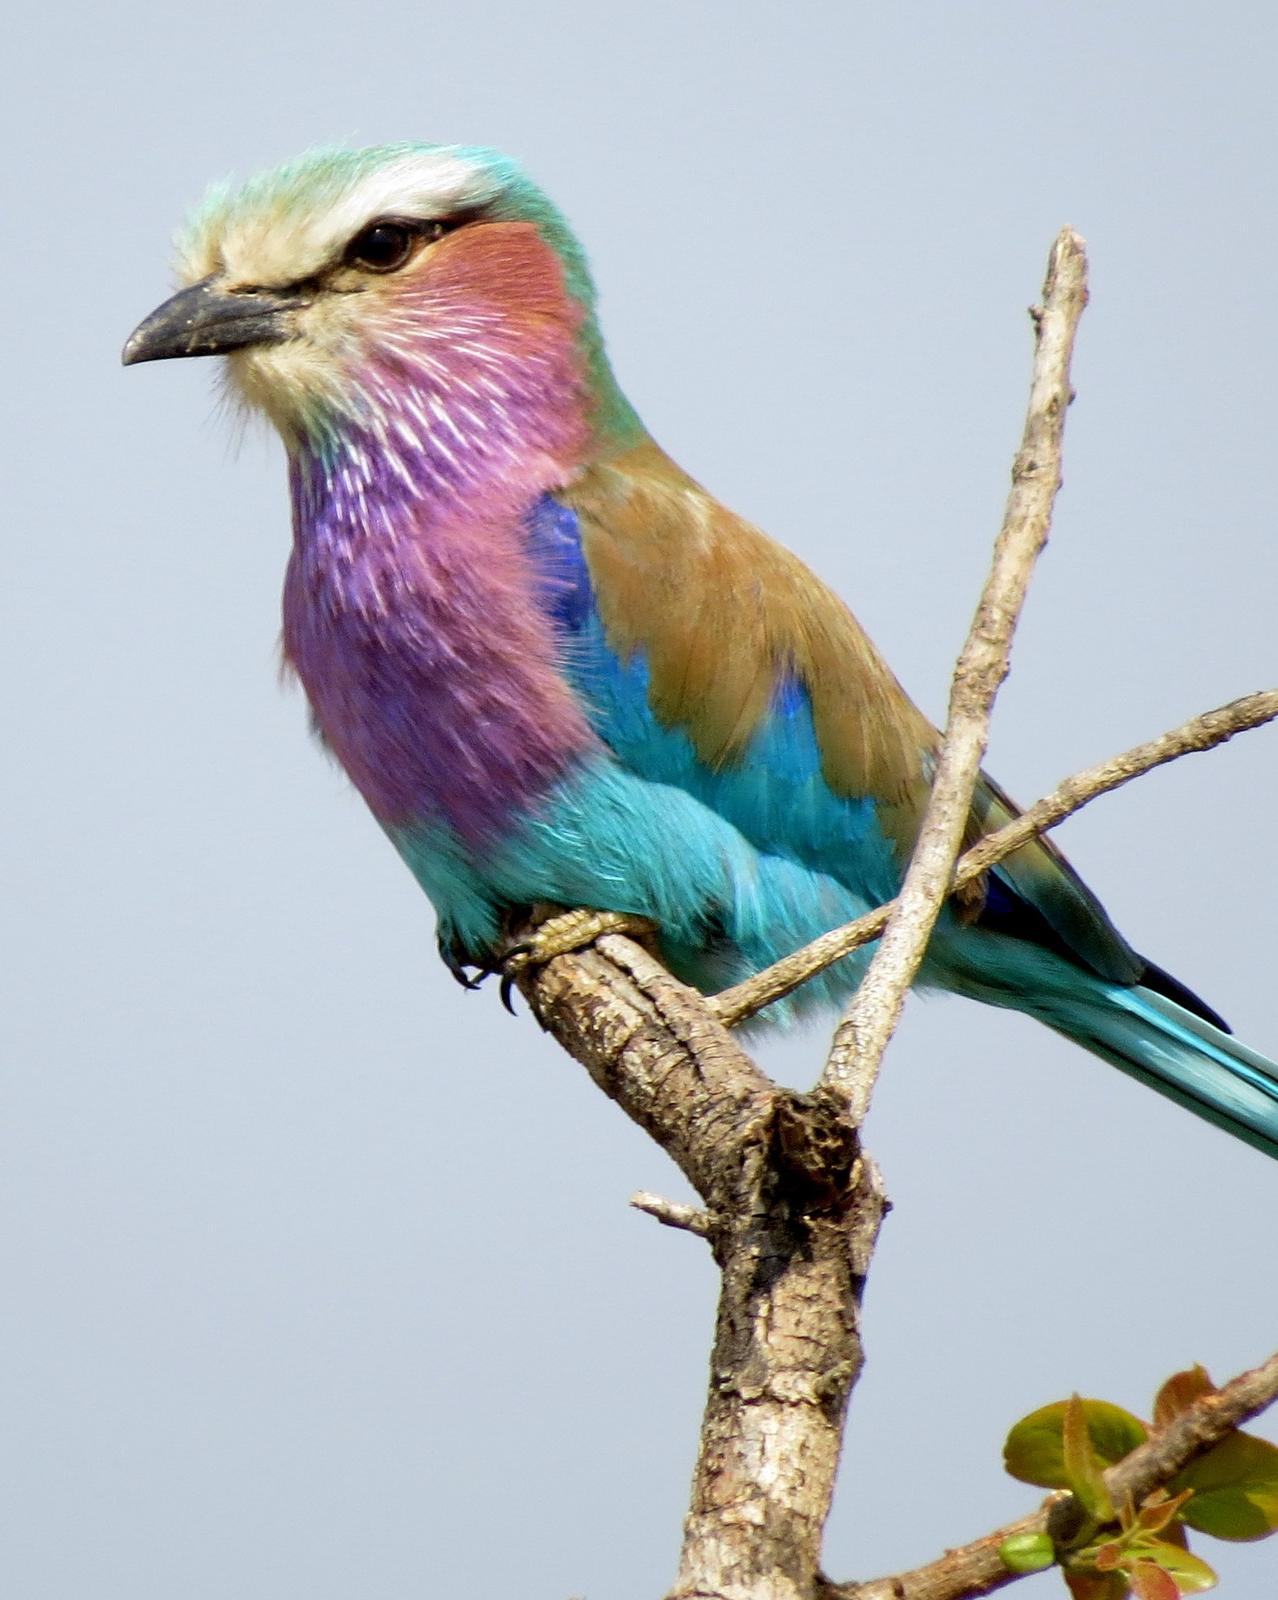 Lilac-breasted Roller Photo by Richard  Lowe